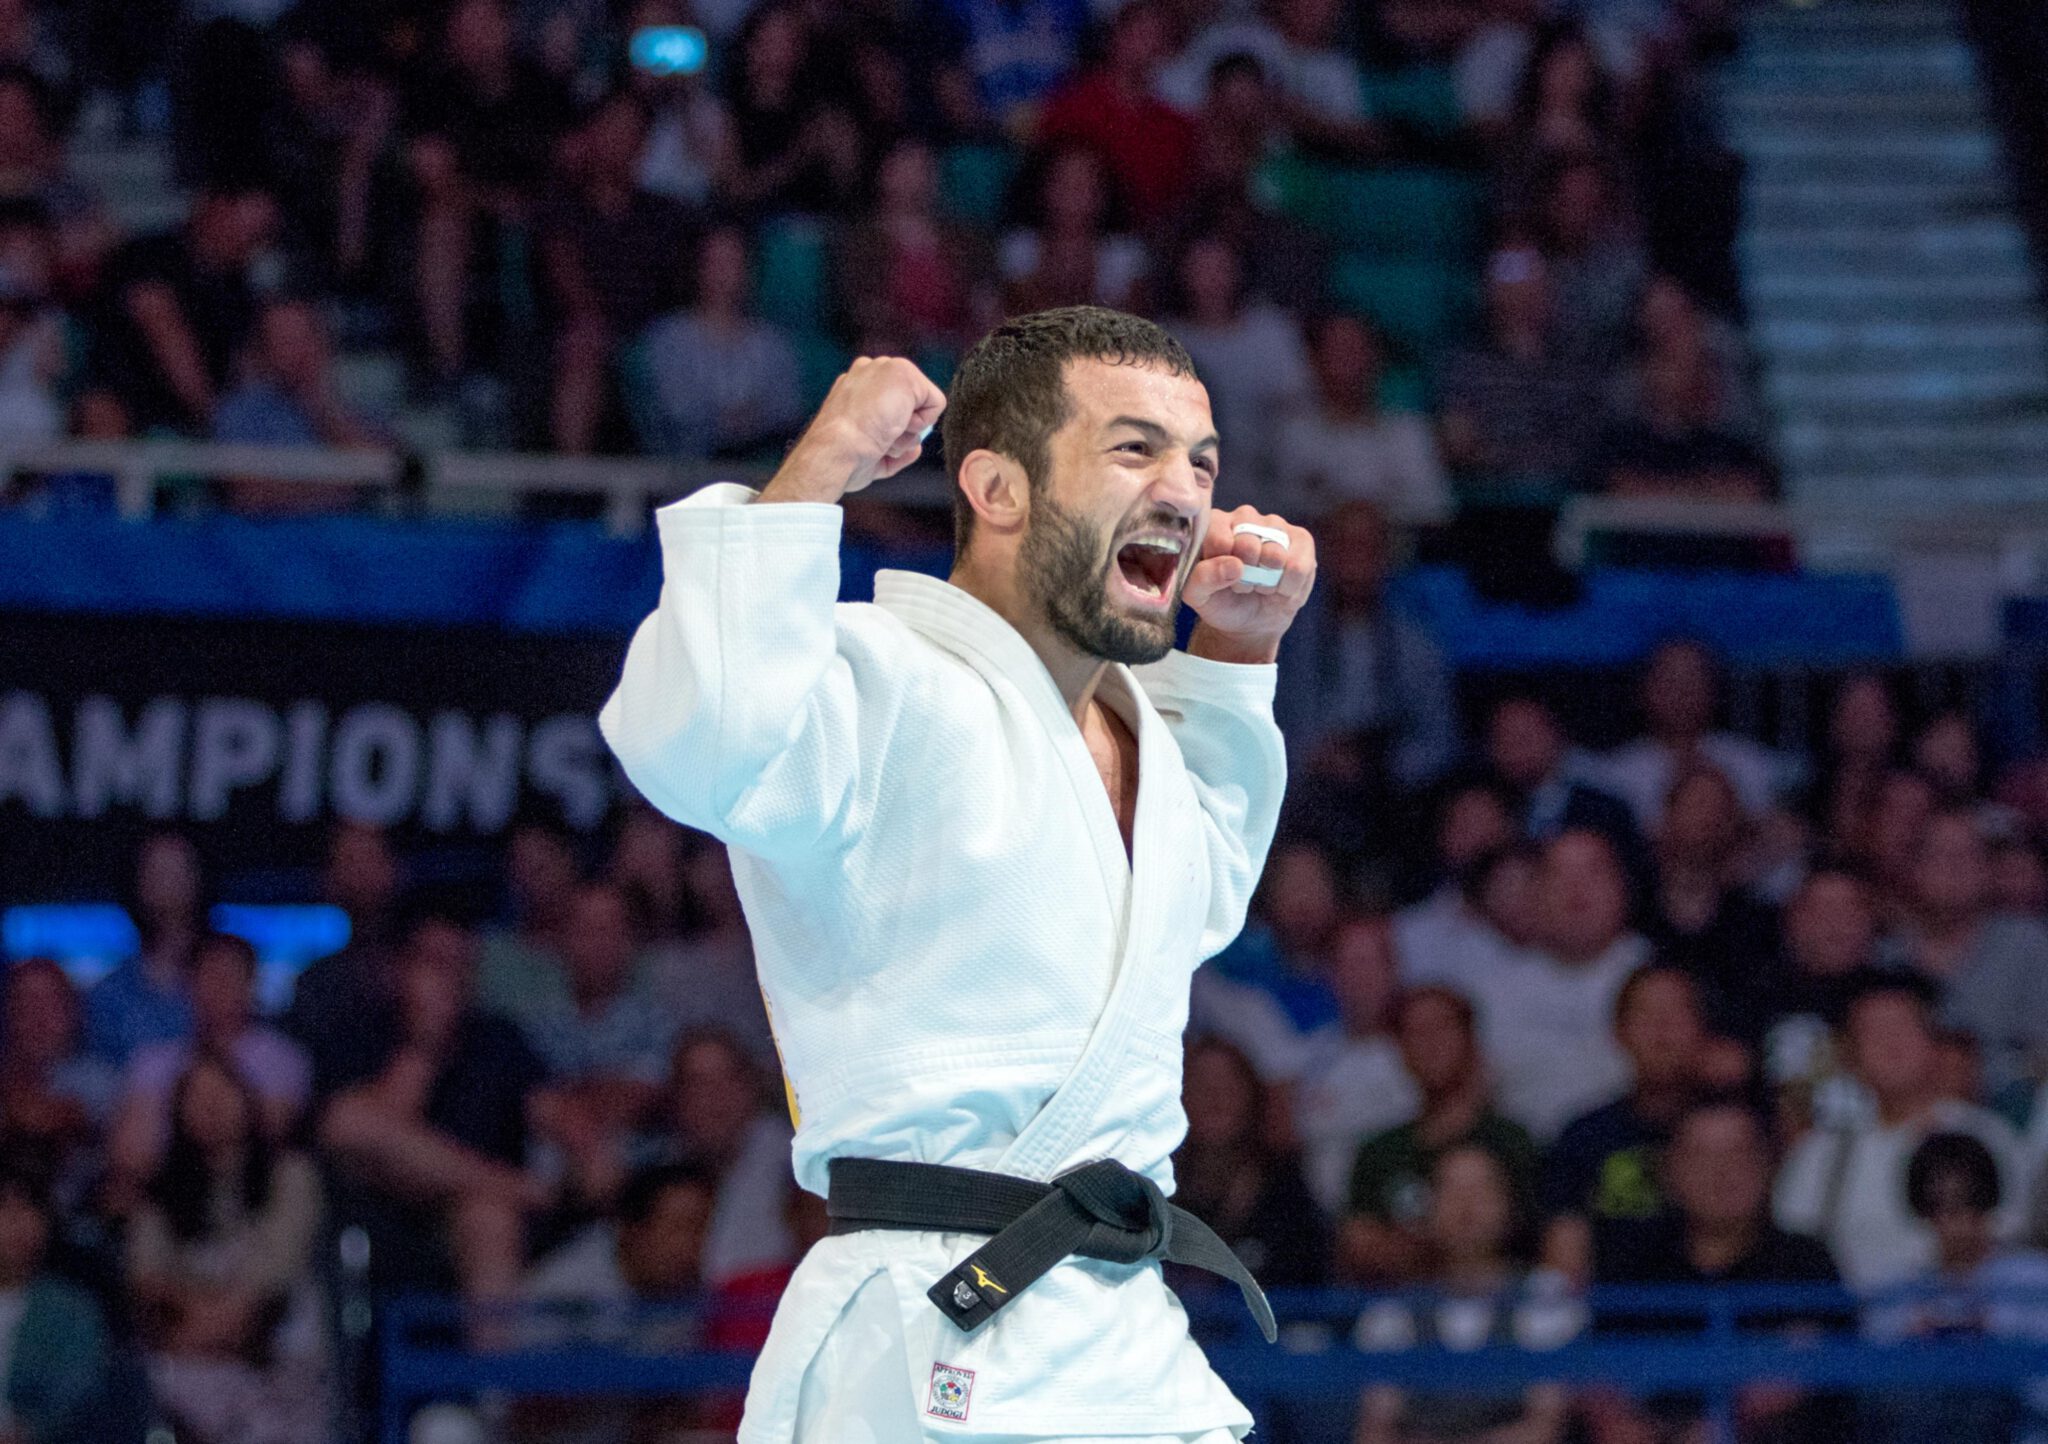 POTENTIAL FOUR GOLDS FOR EUROPE IN ANTALYA